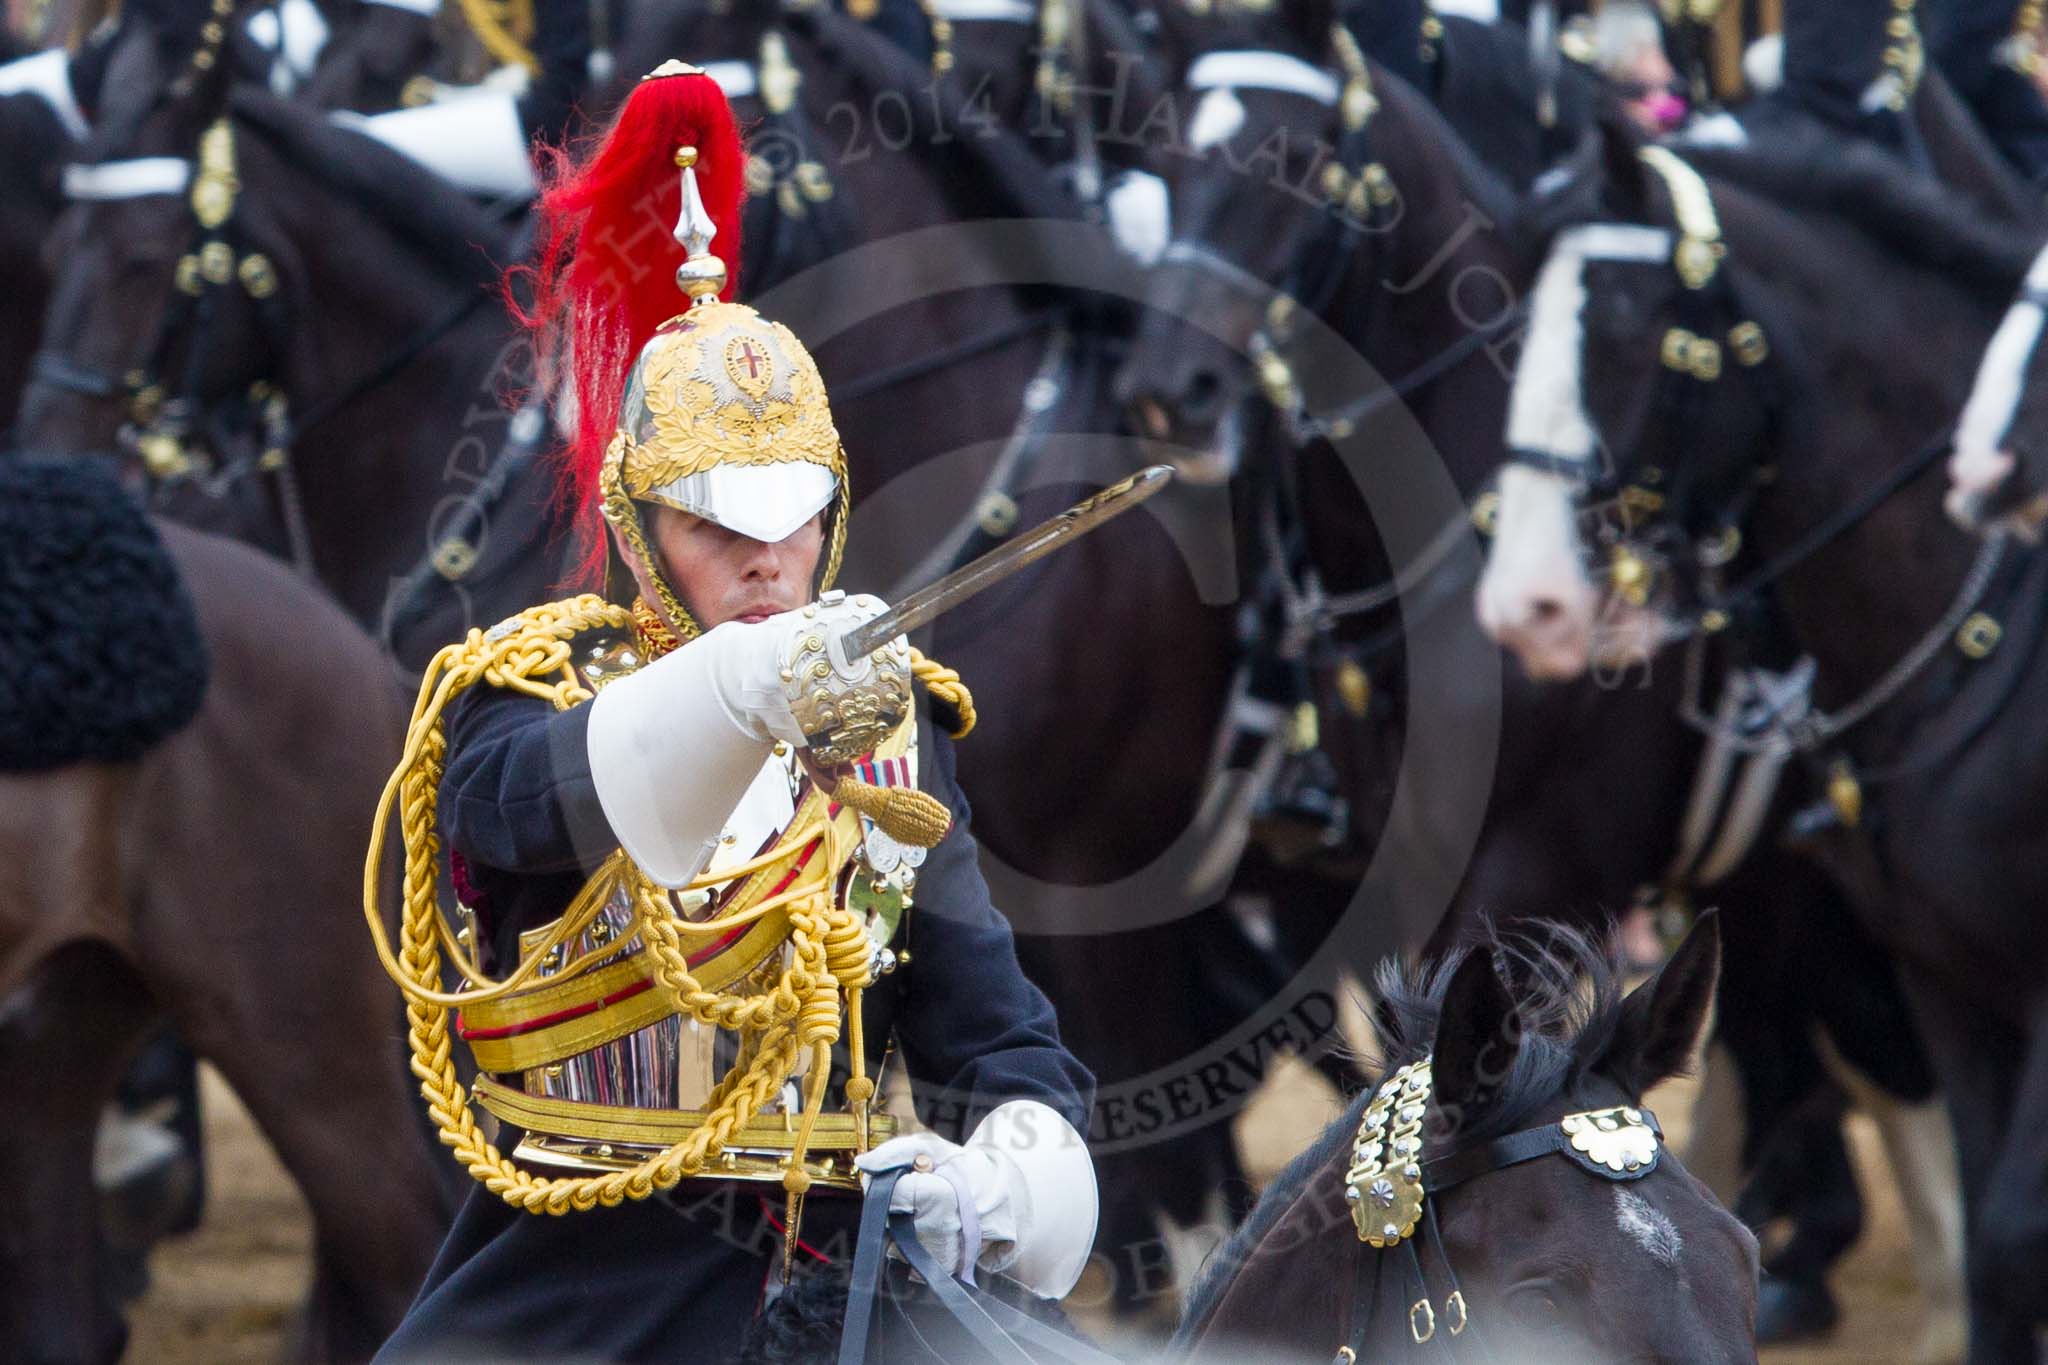 Trooping the Colour 2014.
Horse Guards Parade, Westminster,
London SW1A,

United Kingdom,
on 14 June 2014 at 12:01, image #814